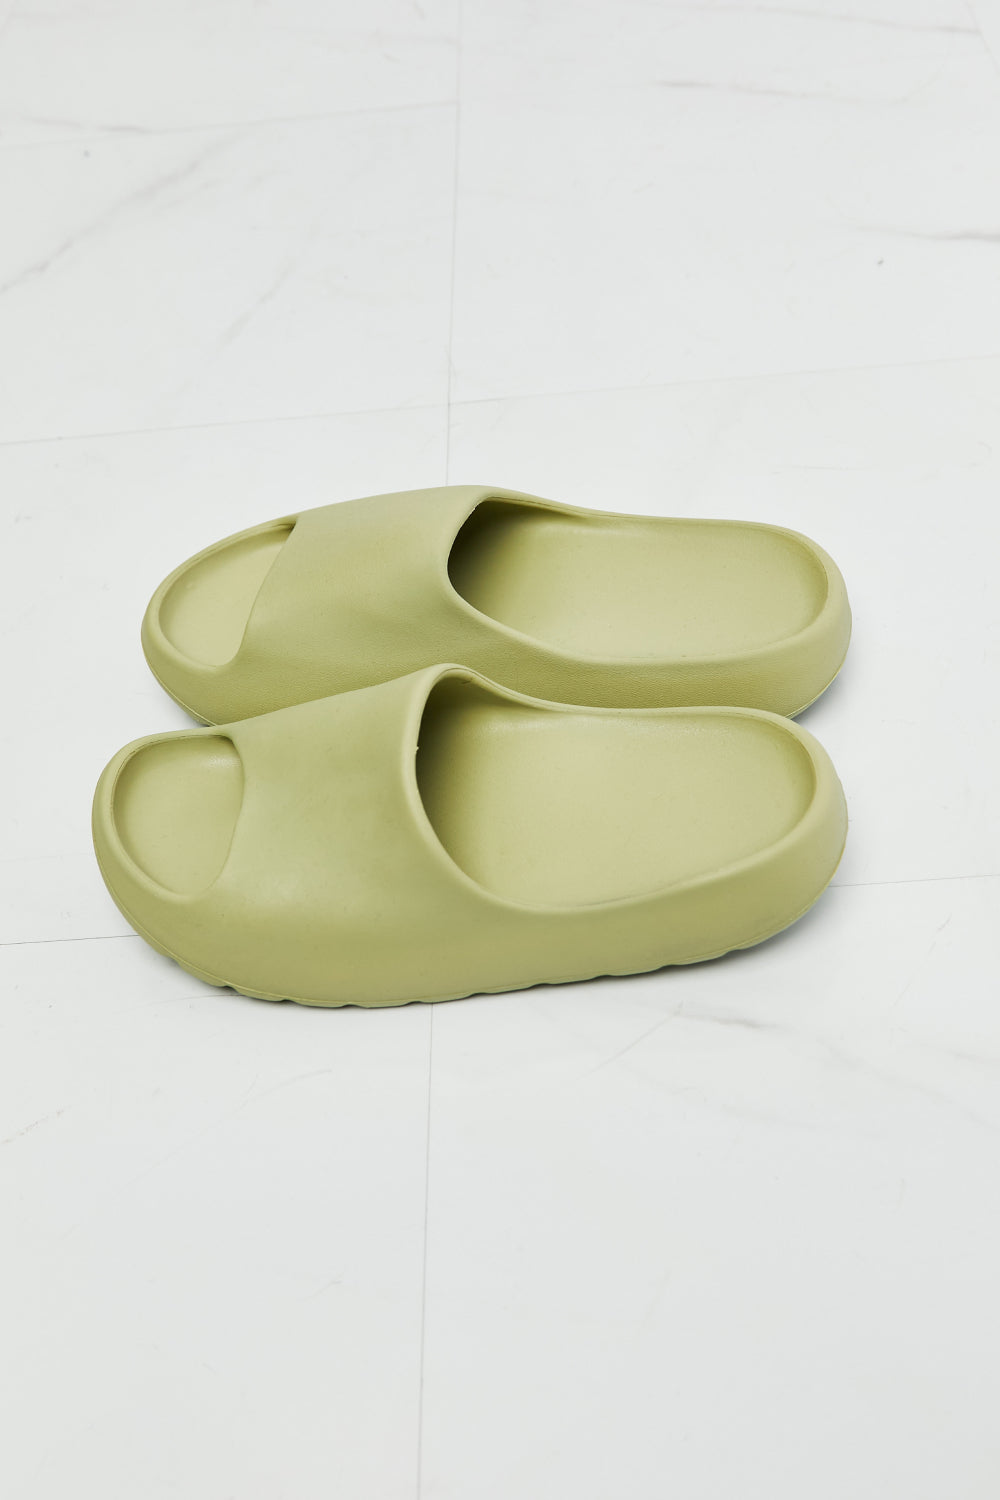 NOOK JOI In My Comfort Zone Slides in Green - Tigbul's Fashion